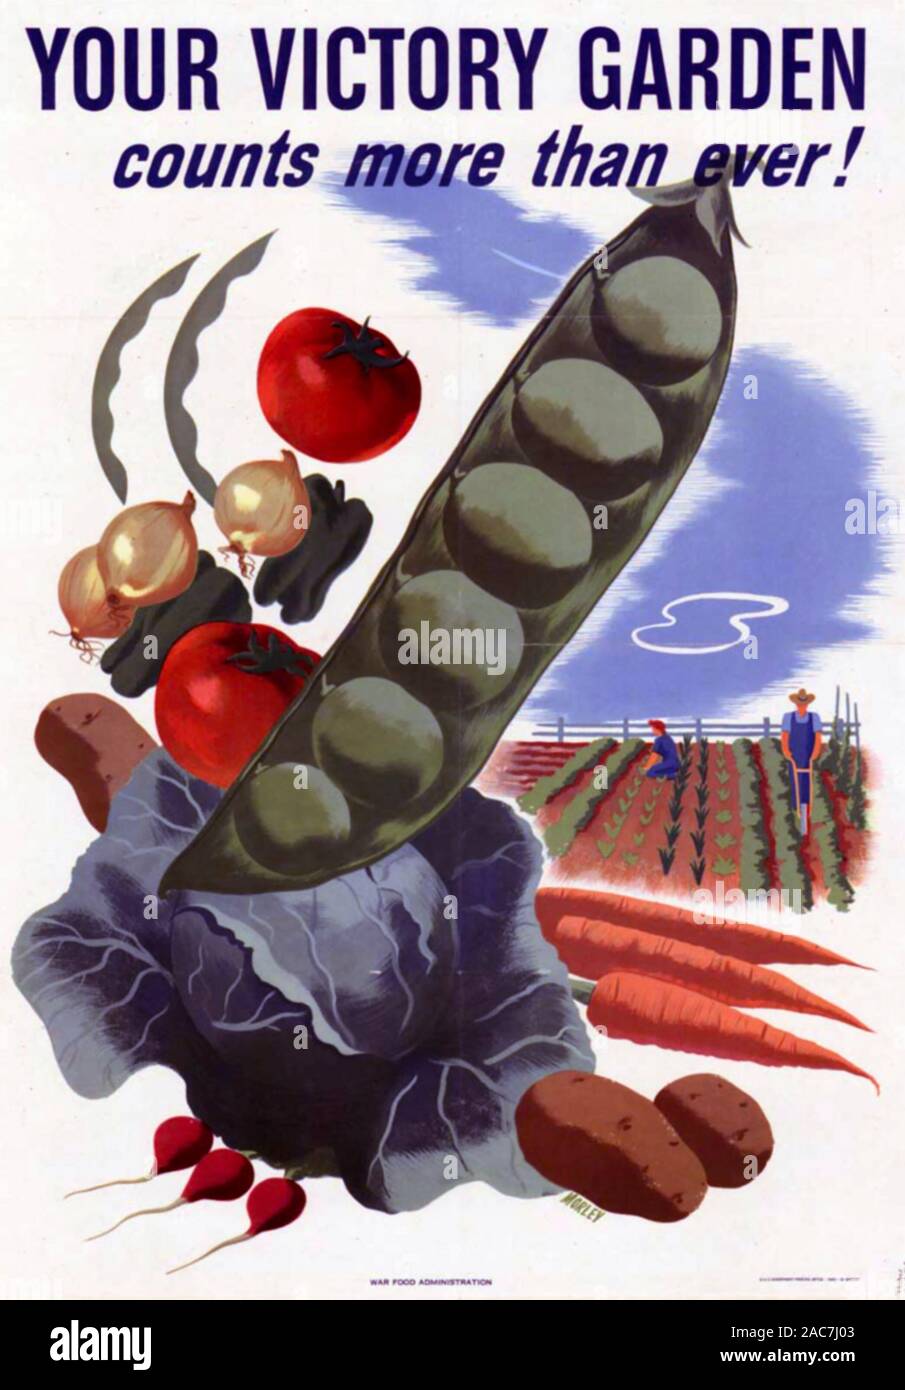 YOUR VICTORY GARDEN  American WW2 propaganda poster urging food production Stock Photo